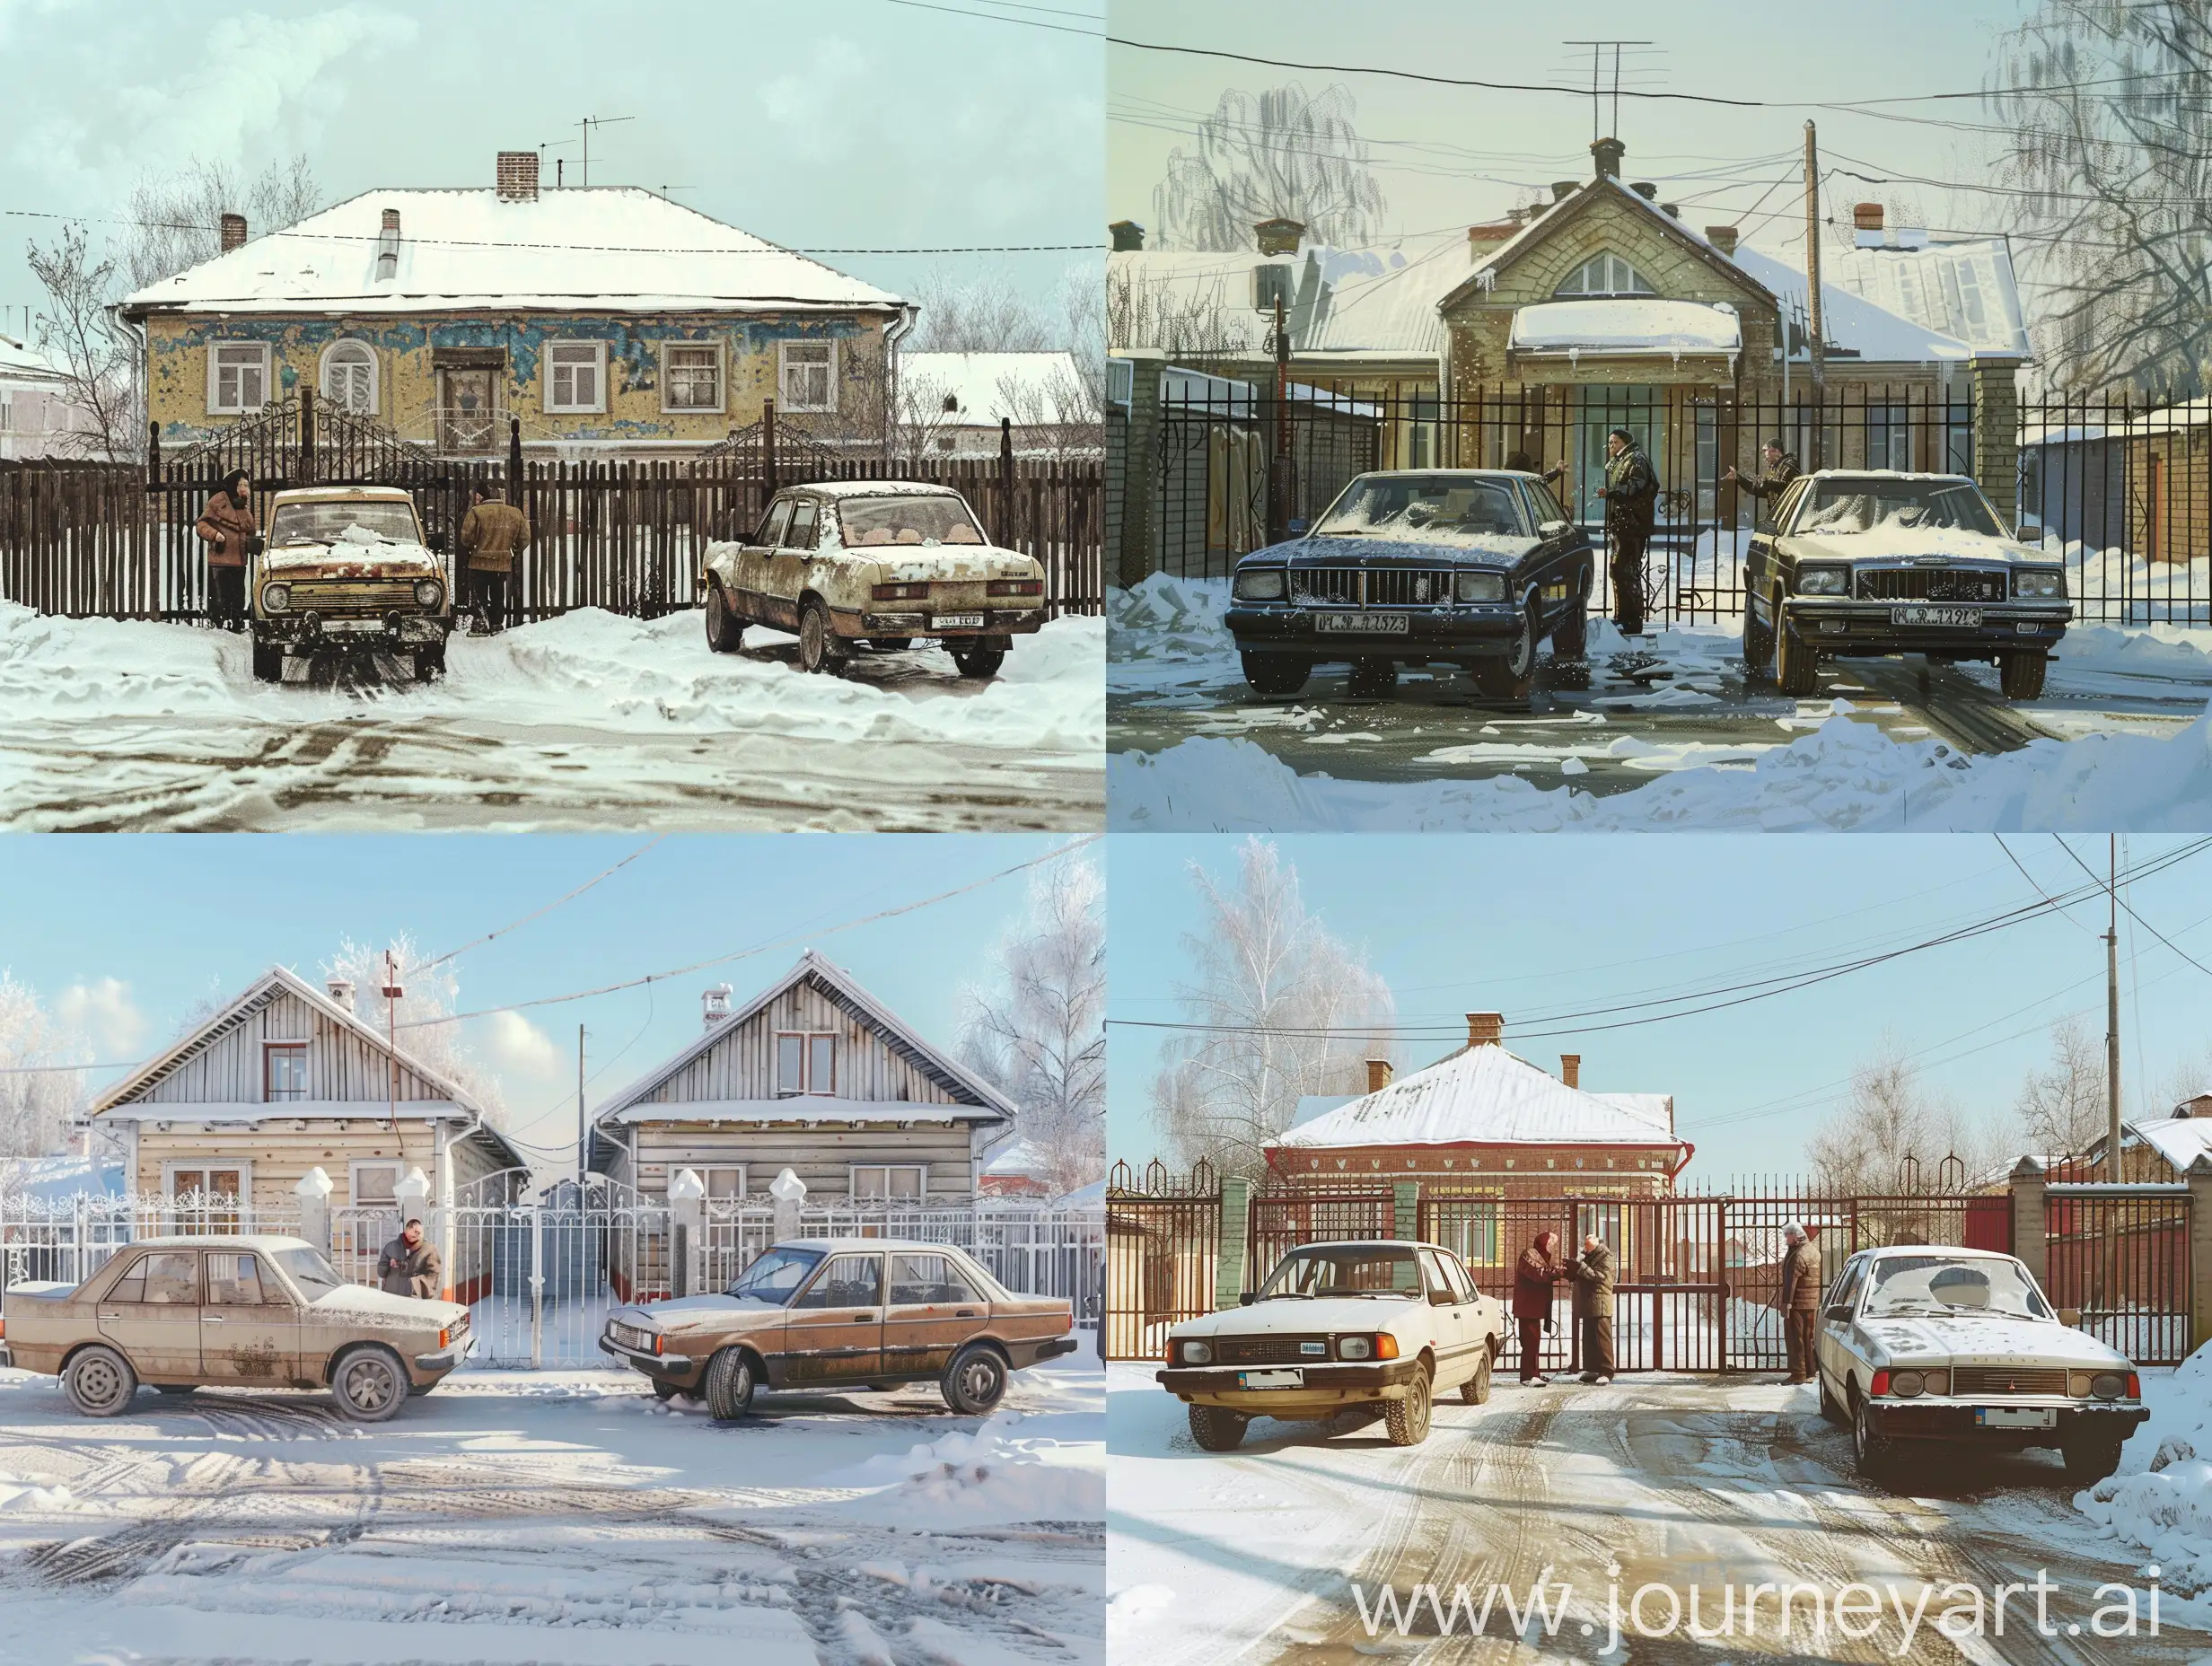 Siberian-House-Scene-Heated-Argument-Between-Car-Owners-on-a-Bright-Winter-Day